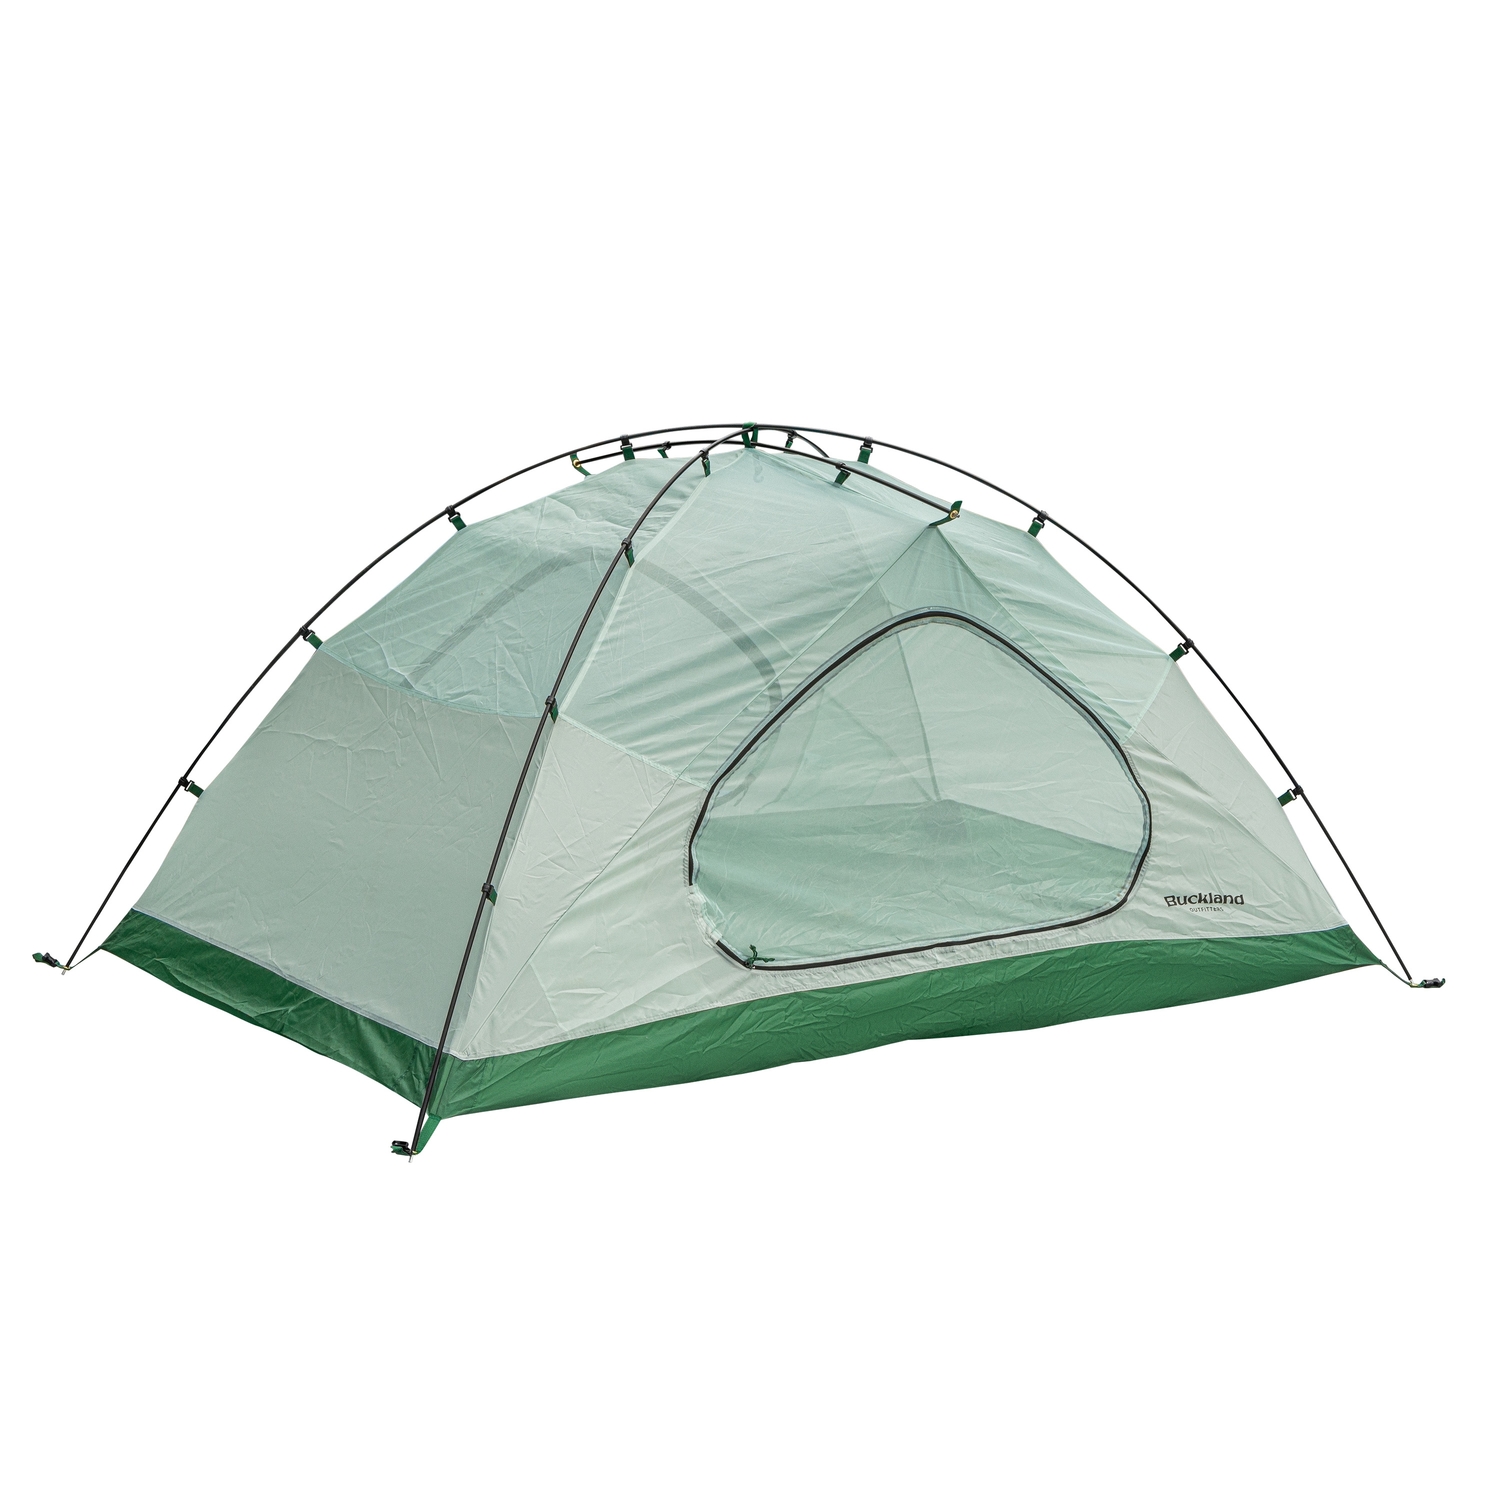 2 pers. tent-210T Polyester-Aluminum poles